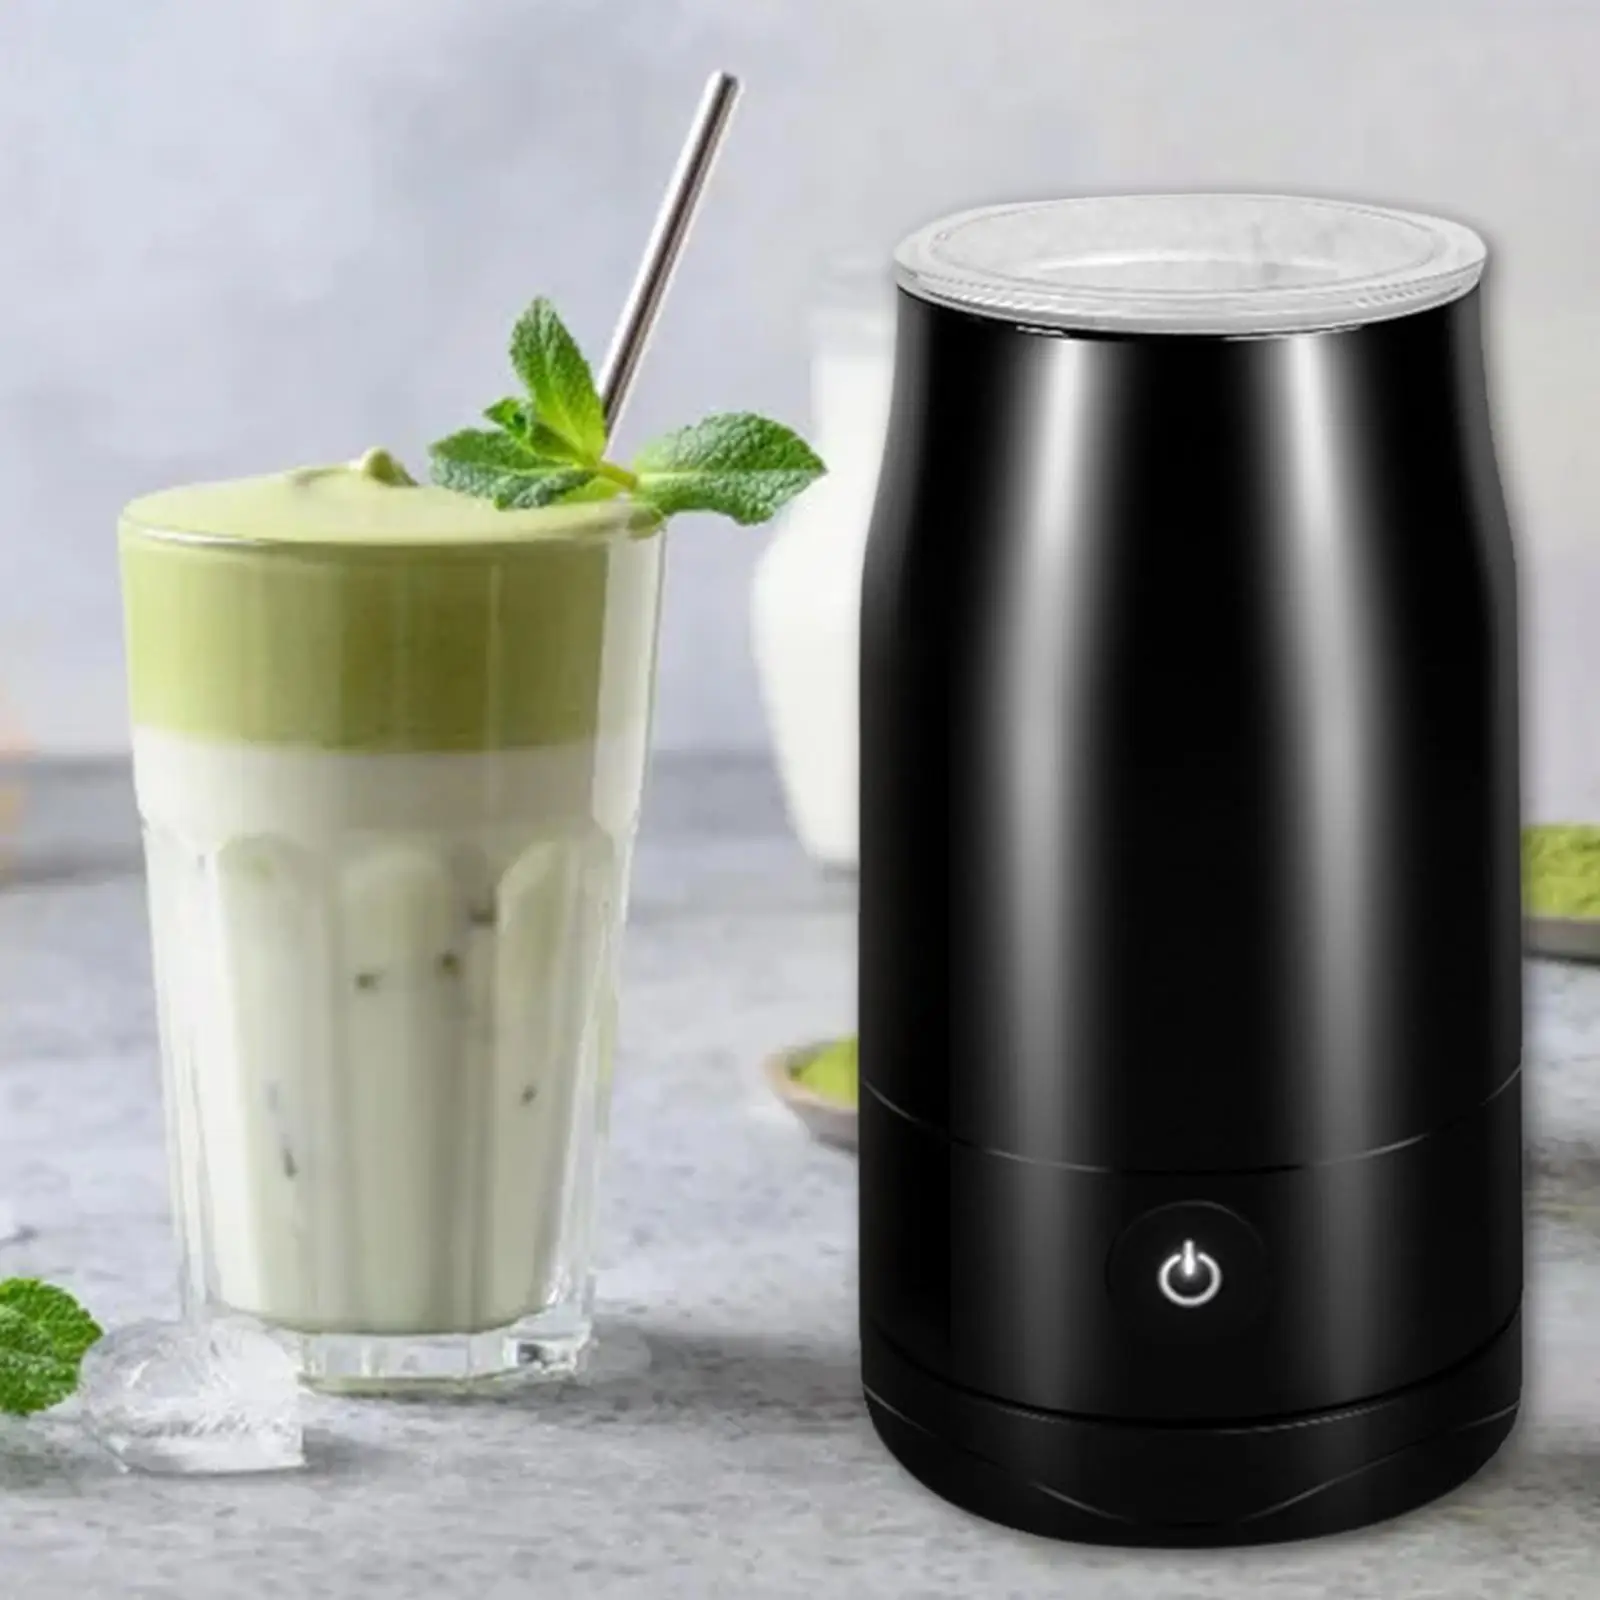 Electric Milk Frother Stainless Steel Hot and Cold Automatic Milk Foamer 310ml Milk Heater for Cappuccino Coffee